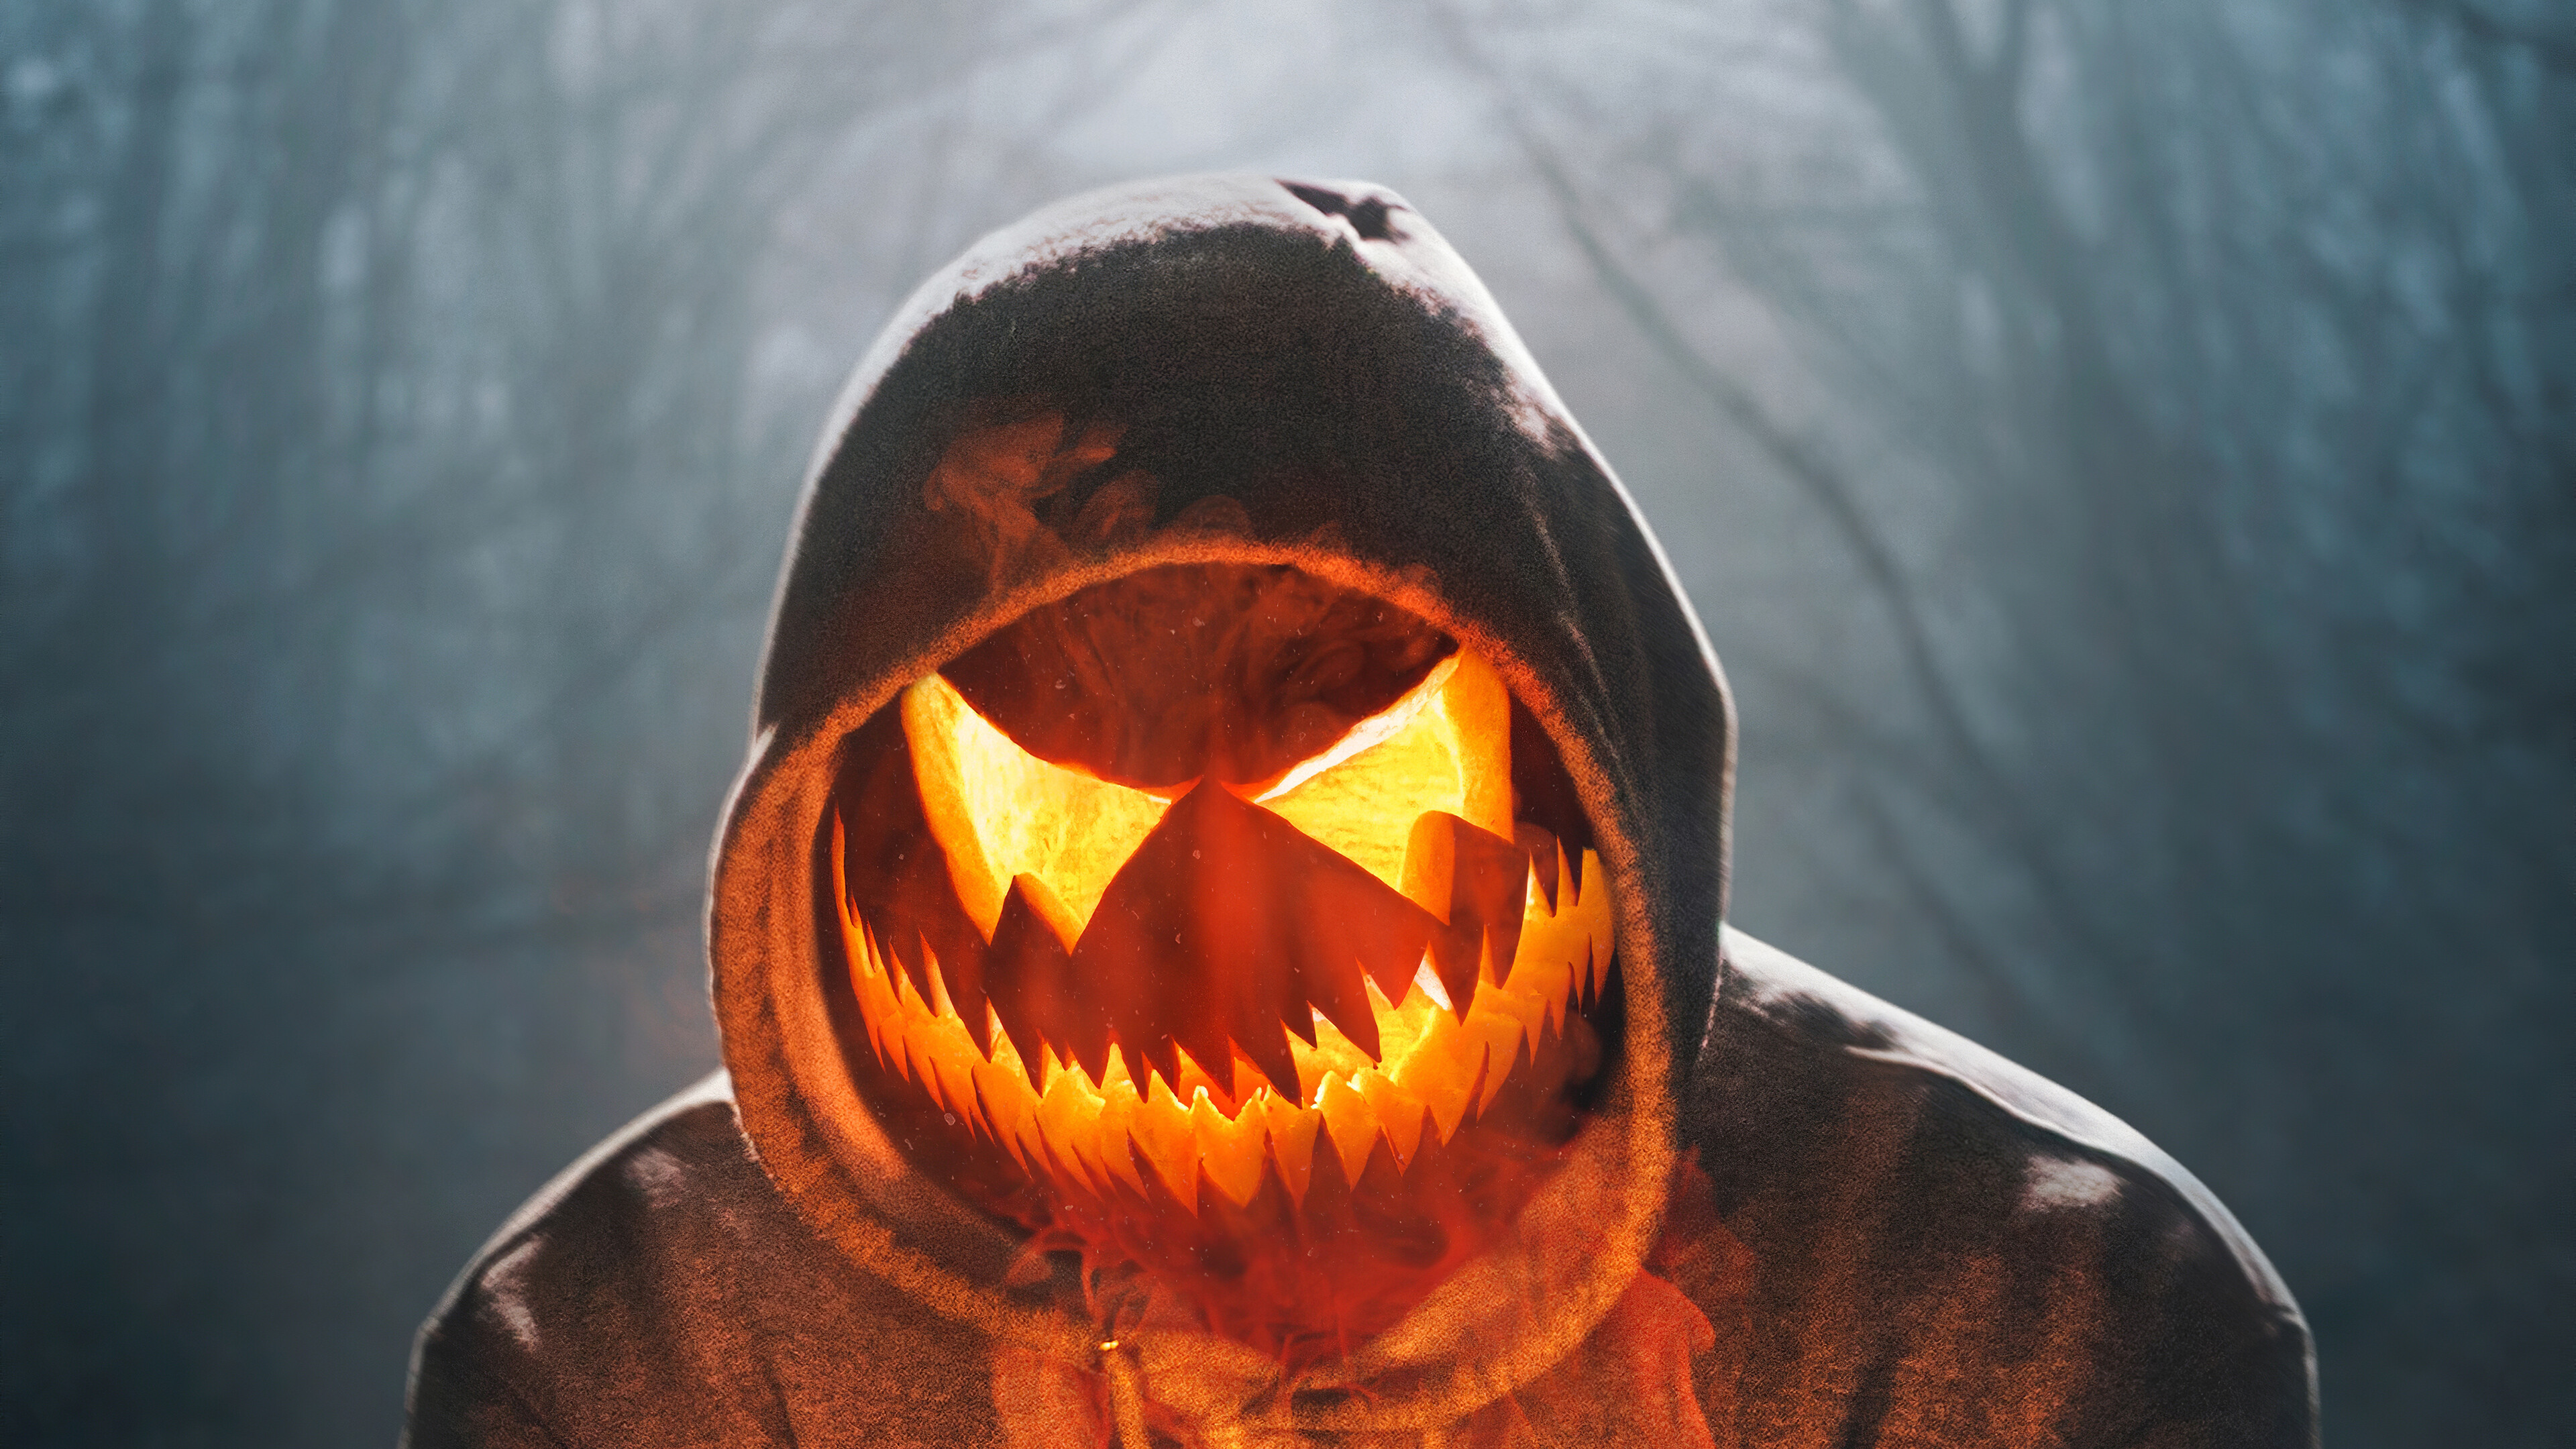 Halloween: A popular American holiday for children and adults, Scary mask. 3840x2160 4K Wallpaper.